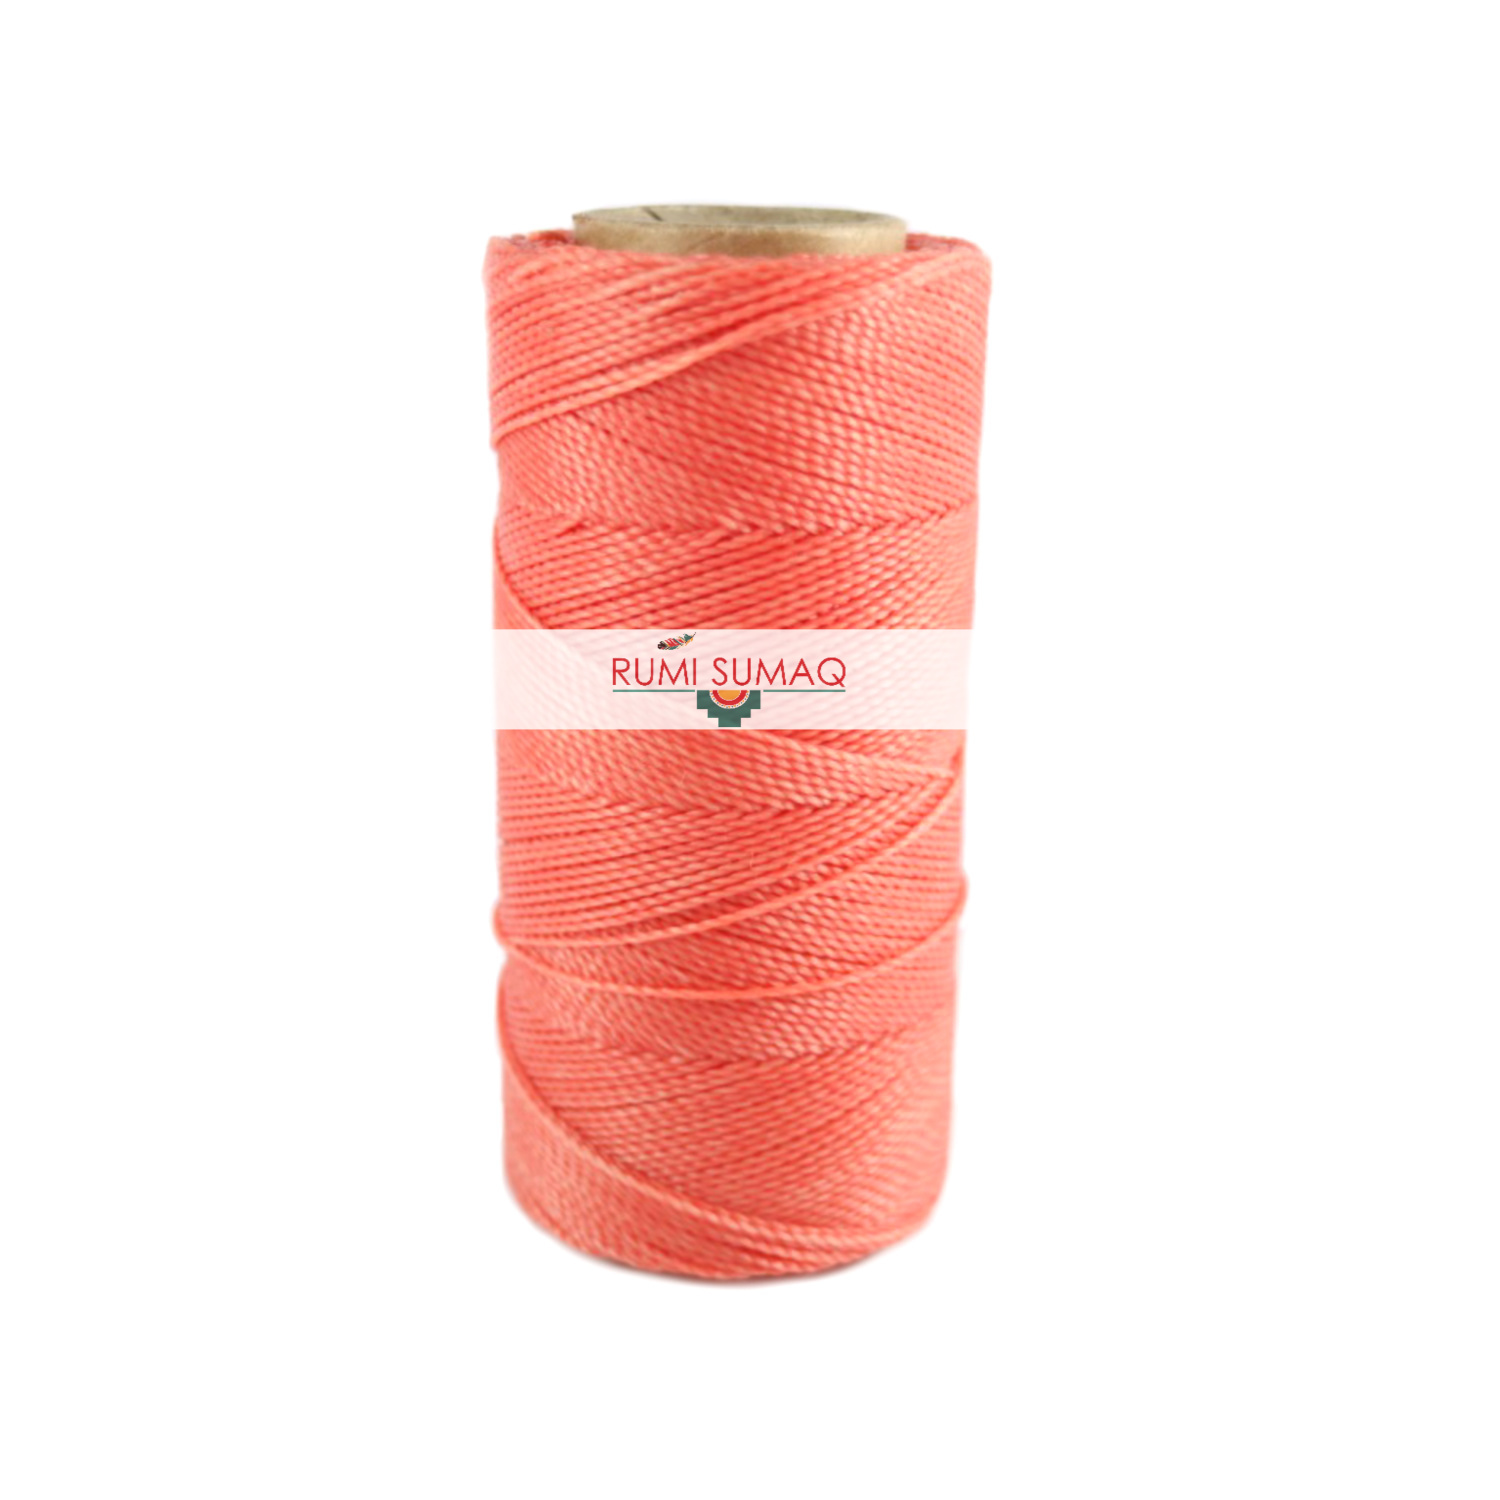 Find 1mm Linhasita 640 salmon coral orange 2-ply waxed polyester cord at RUMI SUMAQ, the premier retailer for waxed cords for knotting and jewelry making.